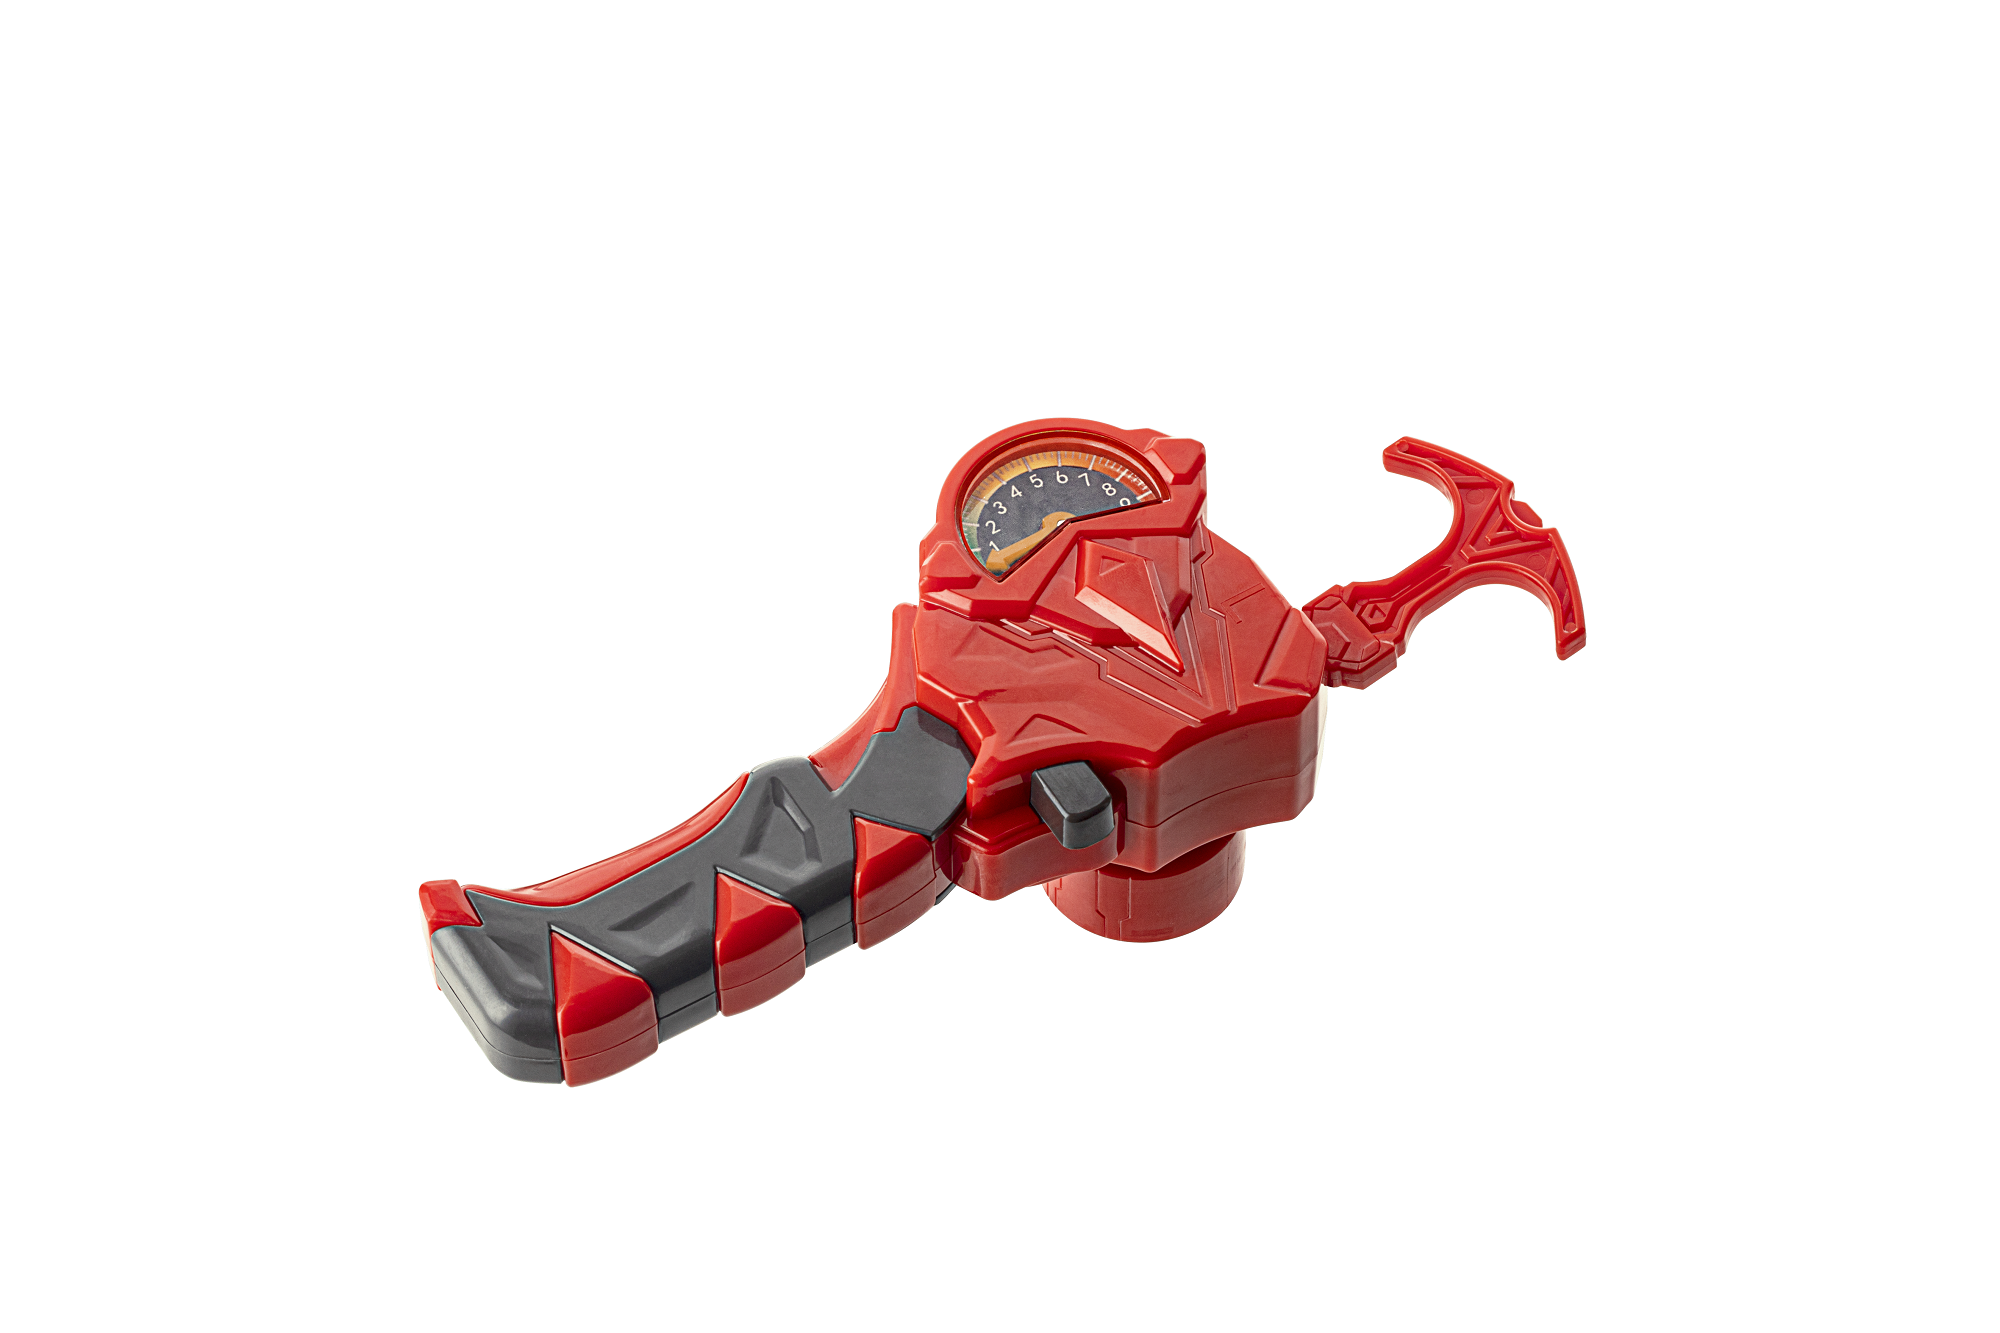 Beyblade Spin Plastic Toy Standard Series with CE Certificate for Kids Age 6+ (Flame Dragon)